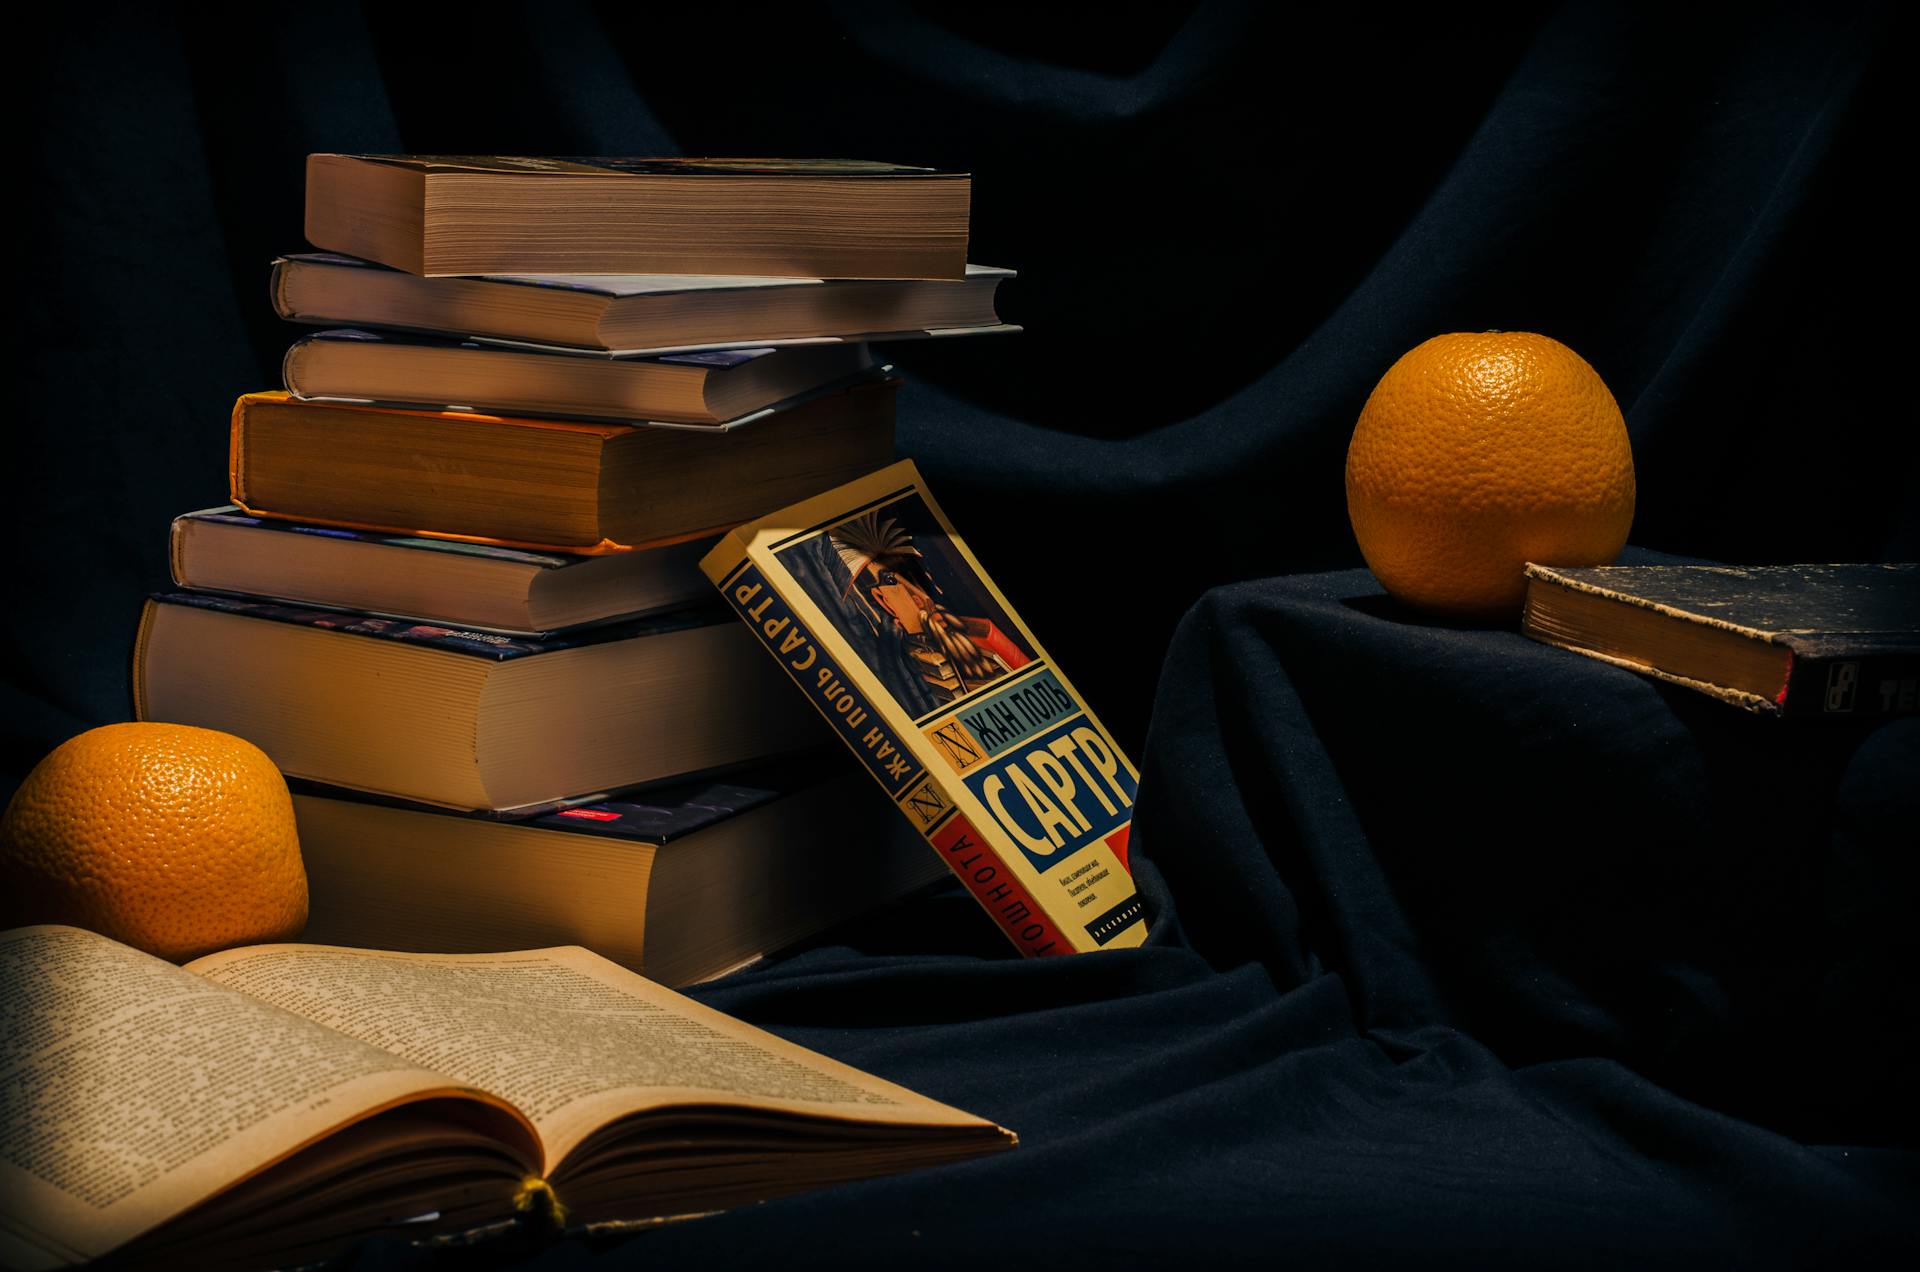 Stacked books with an orange and a prominently displayed title 'CAPTURE', symbolising authentic storytelling in a cozy, intellectual setting.